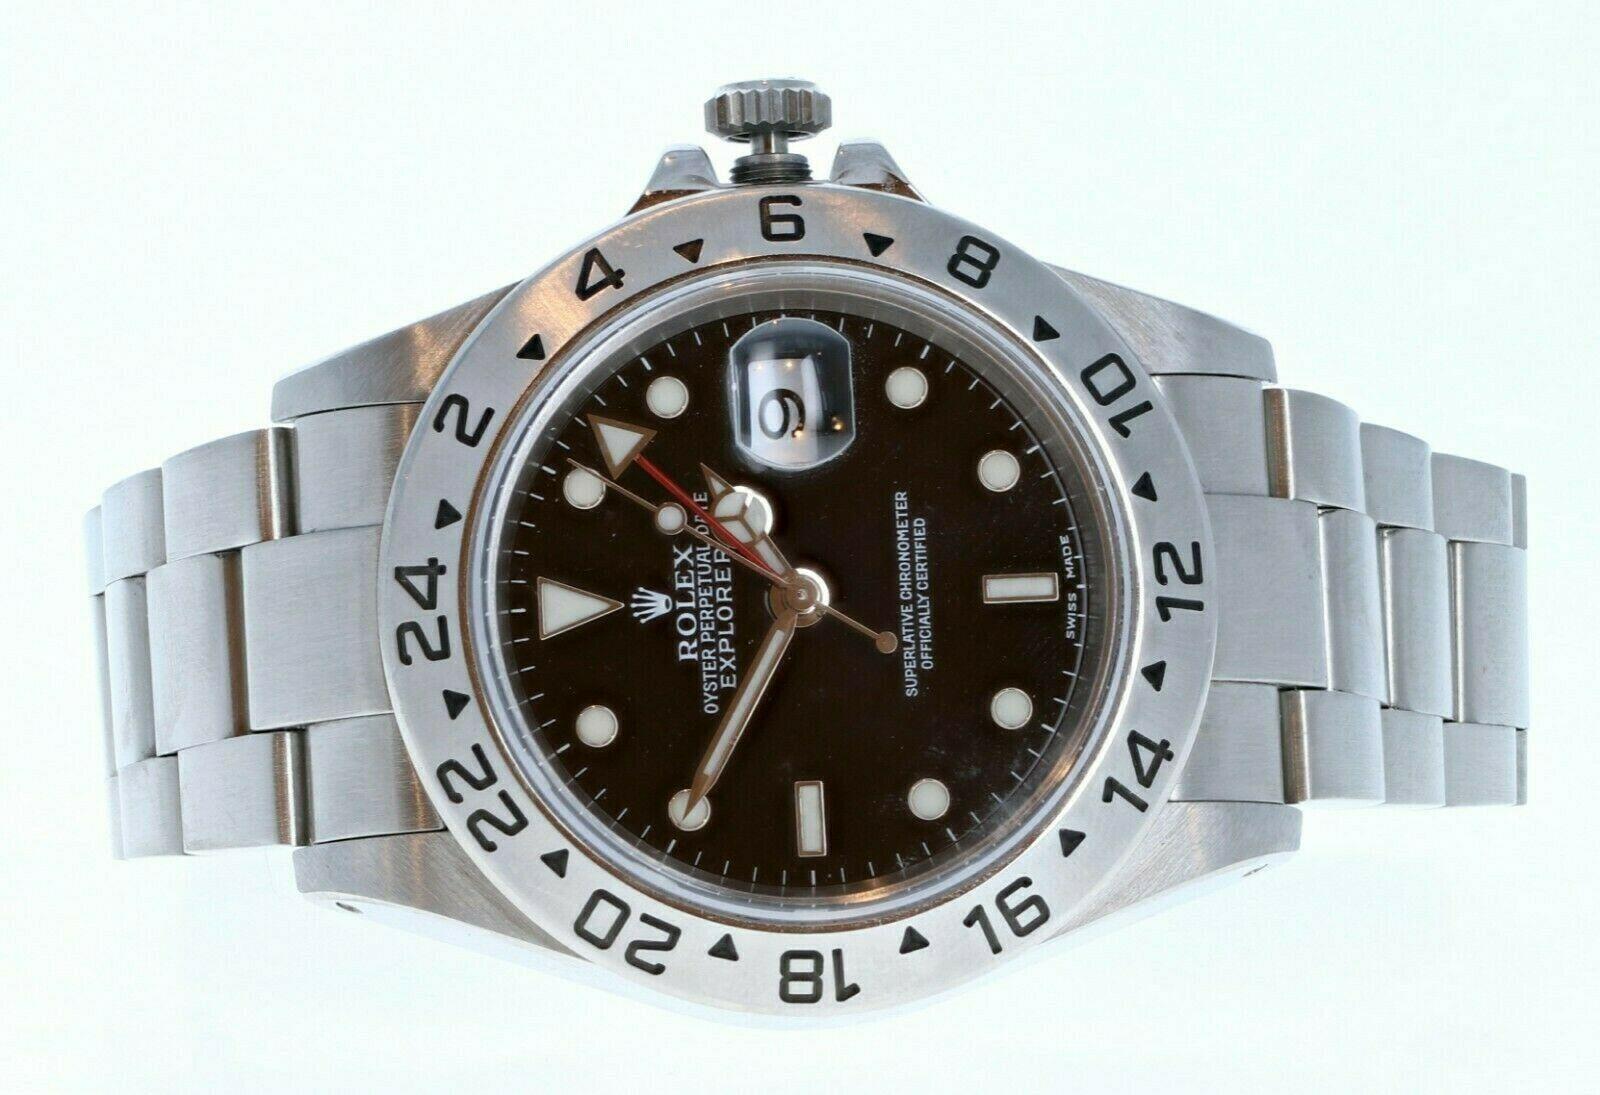 Rolex Explorer II 16570 GMT Stainless Steel Black Dial Watch W/ Papers For Sale 1